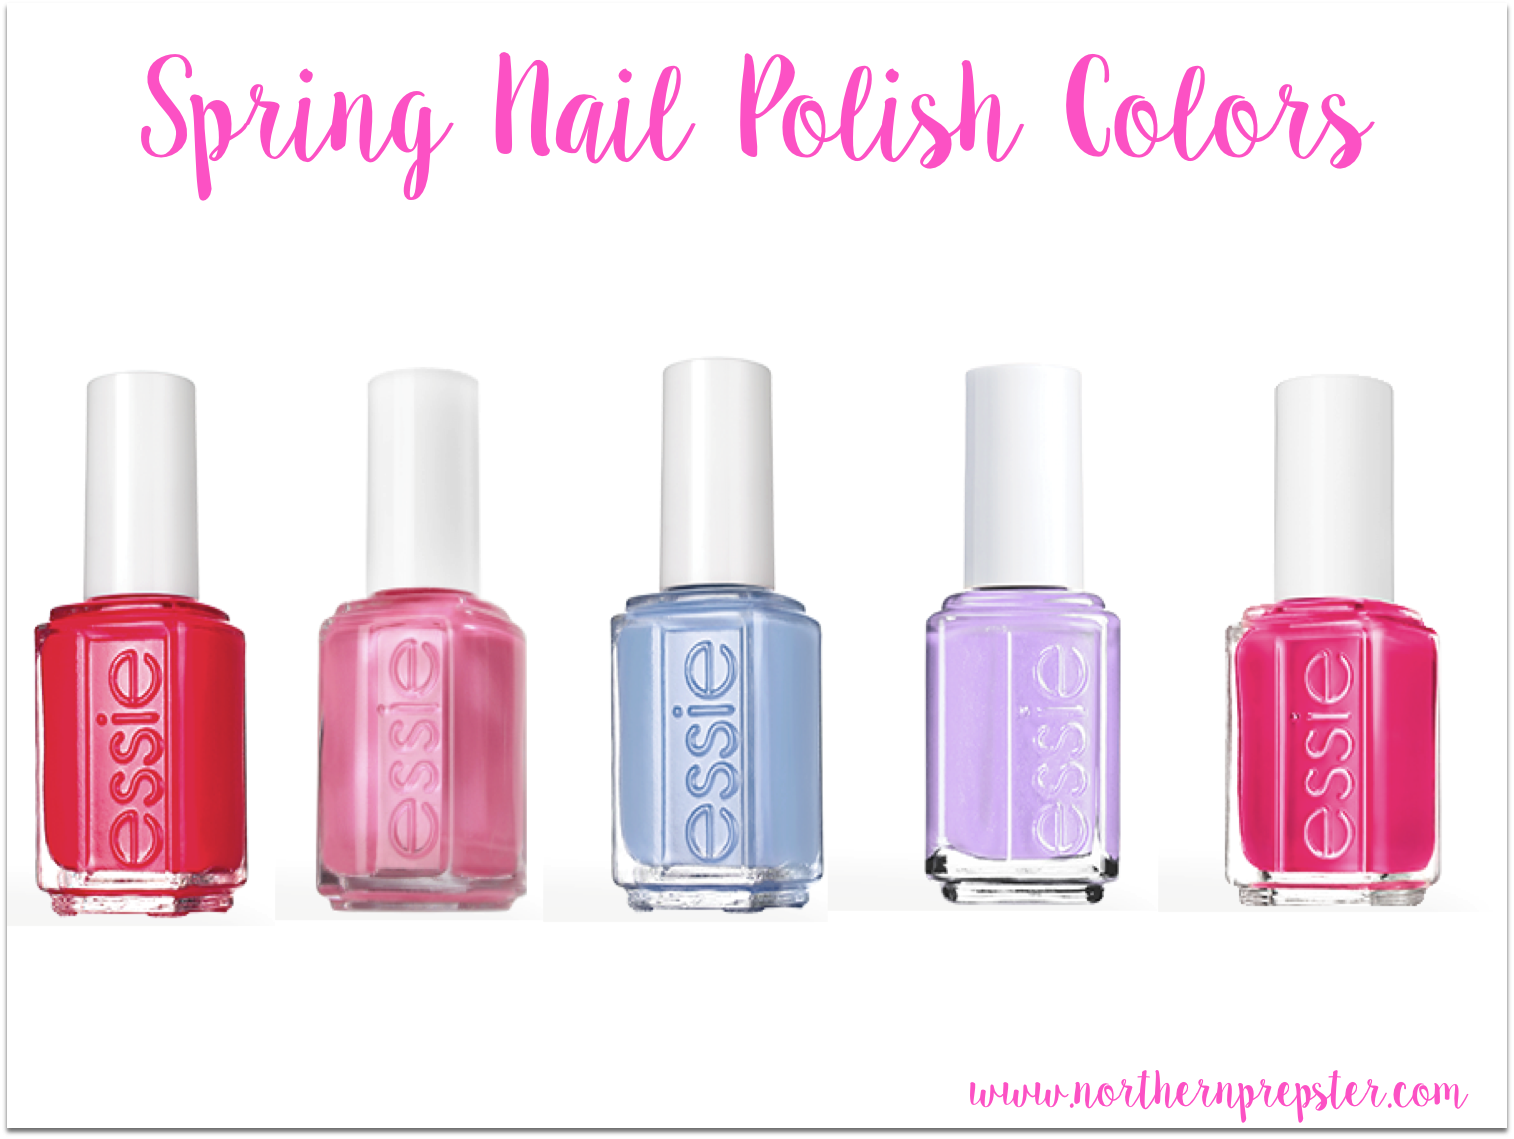 10. "On-Trend Toe Nail Polish Colors for Spring 2021" - wide 5